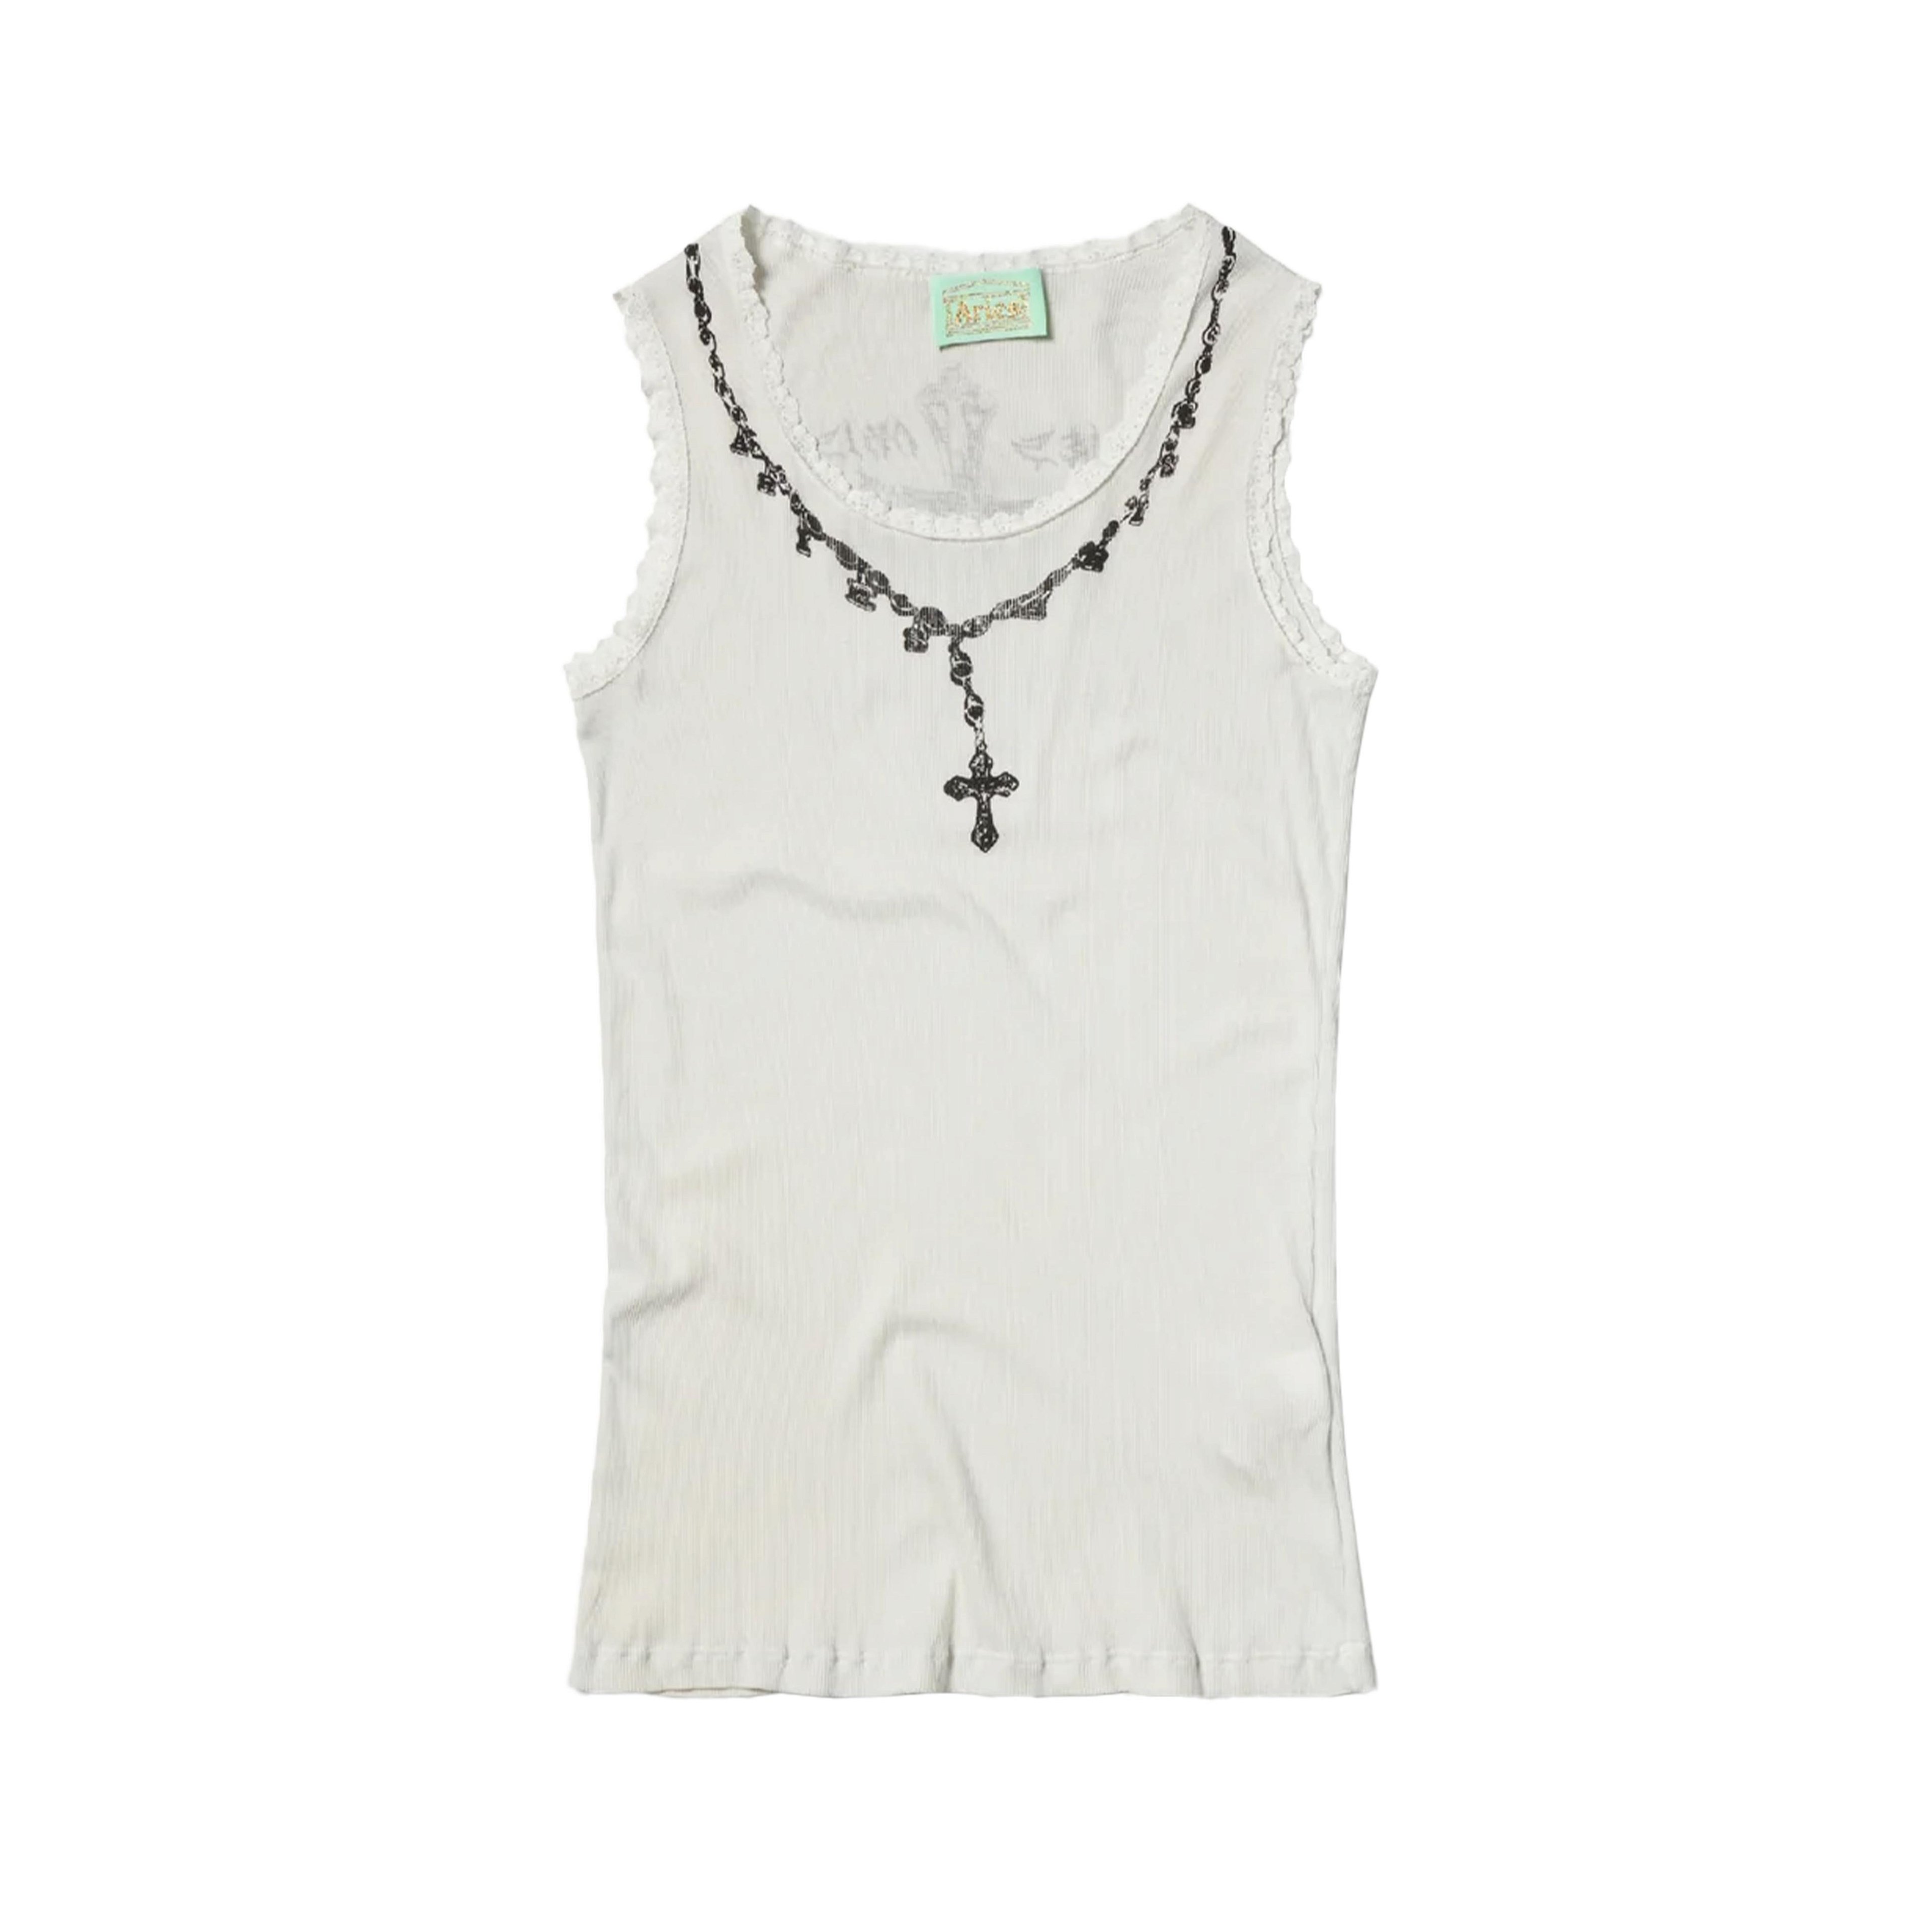 ARIES - Rosaries Lace Trim Vest - (White) by ARIES